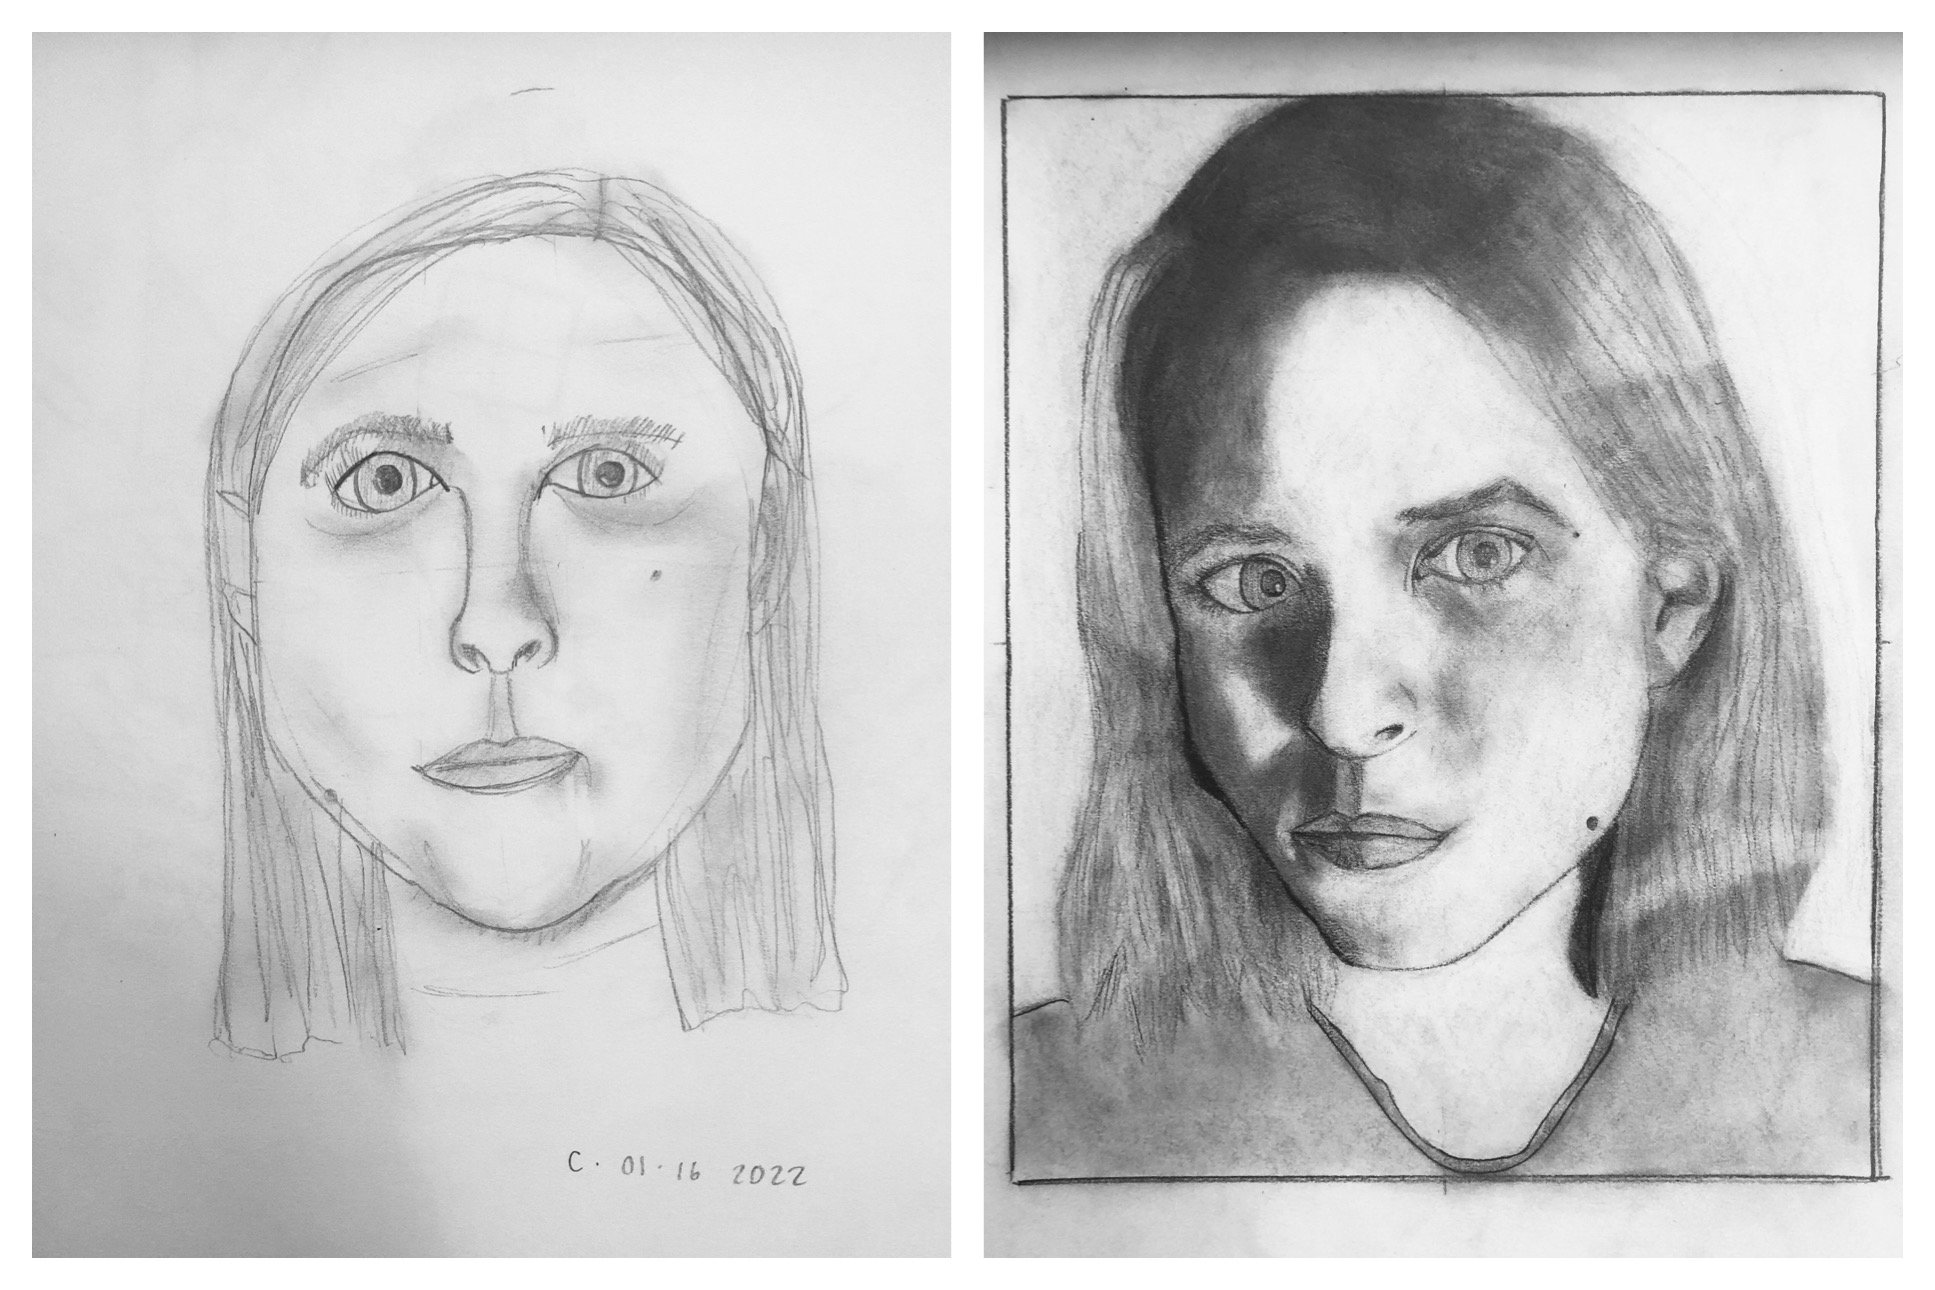 Crawford H's Before and After Self-Portraits January 17-22, 2022